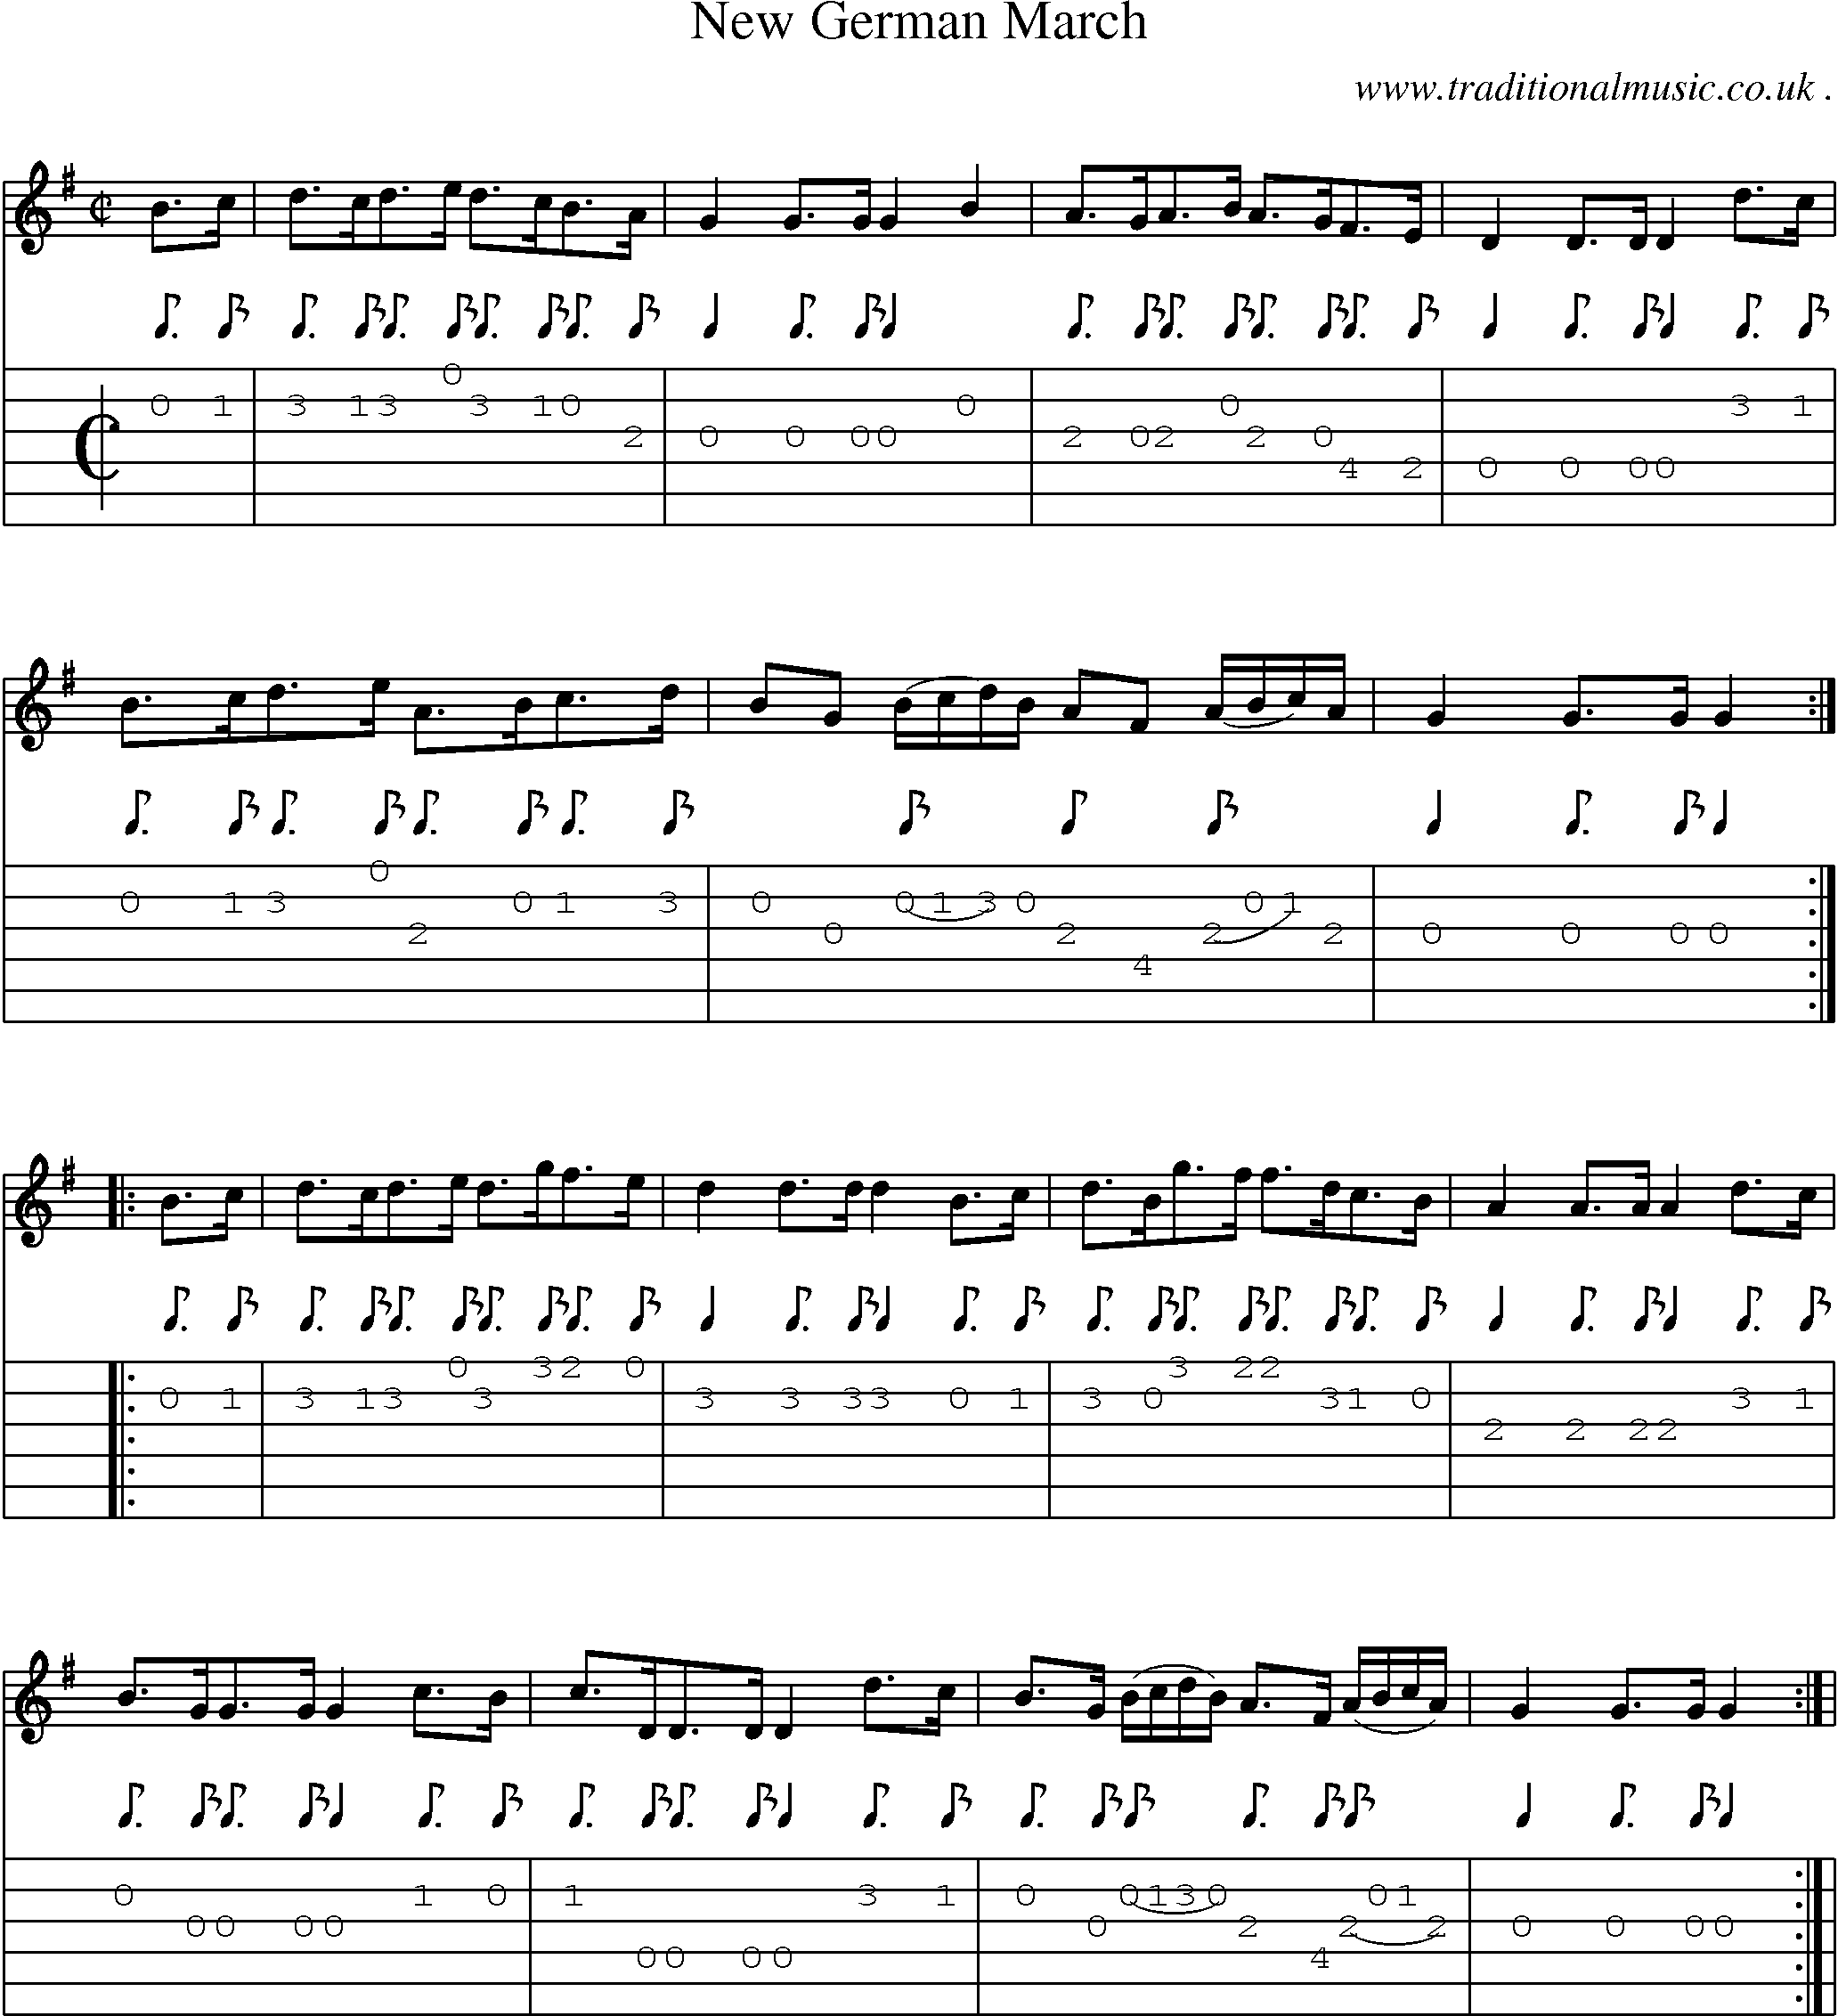 Sheet-Music and Guitar Tabs for New German March